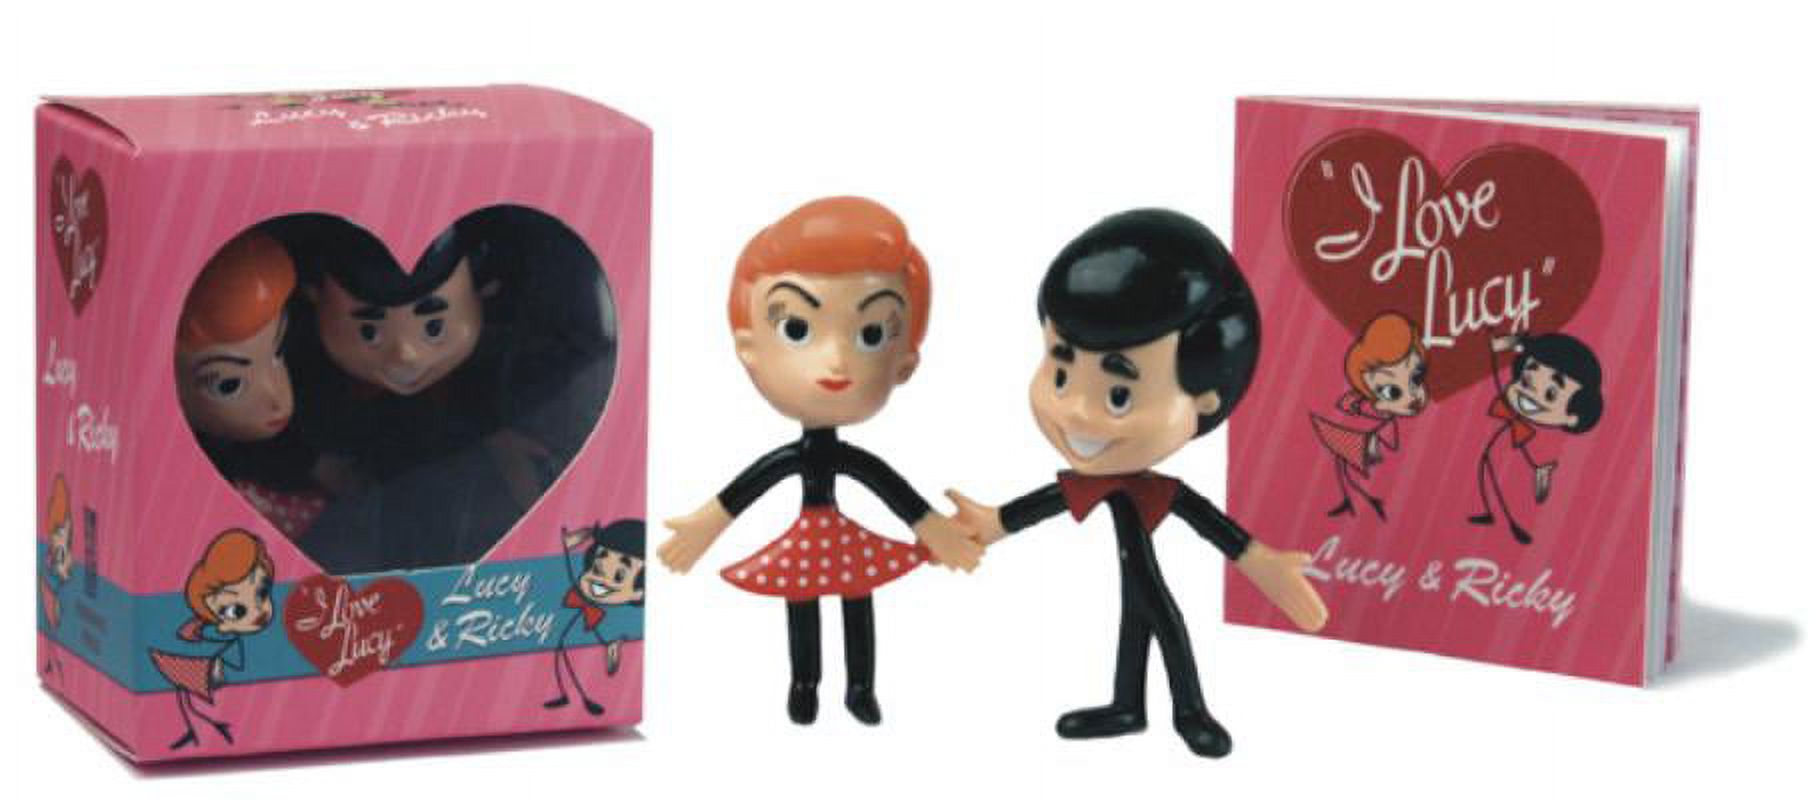 I Love Lucy: Lucy & Ricky (Miniature Editions) - image 1 of 1